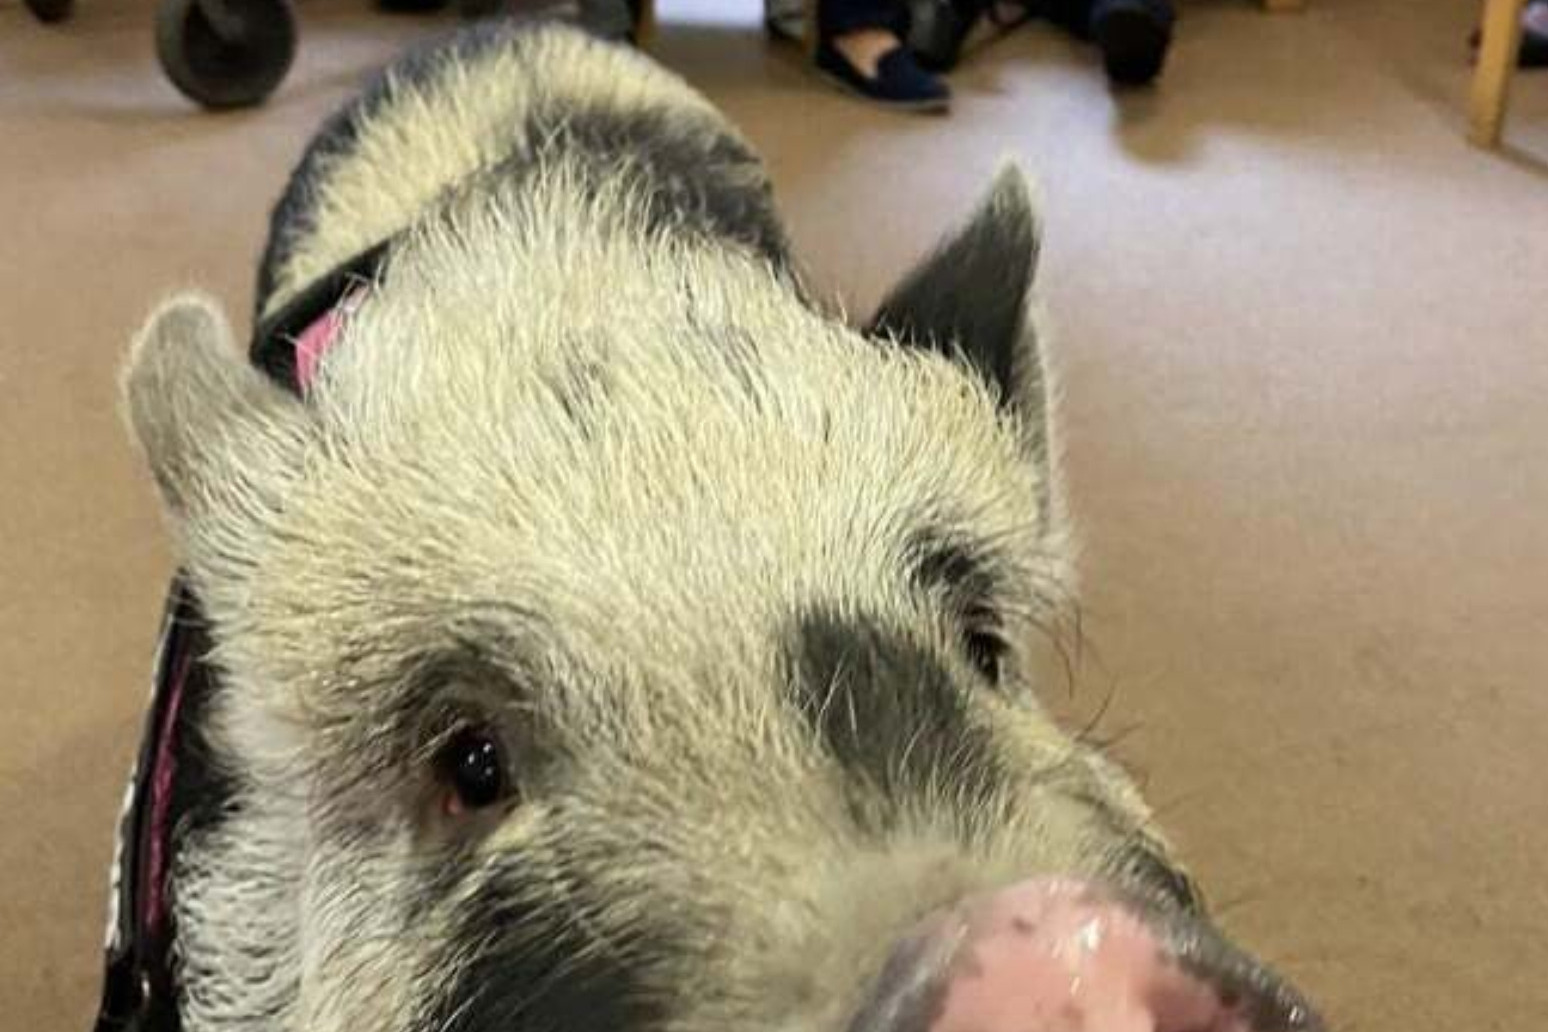 Pet pig hogs the attention on visit to owner’s care home 